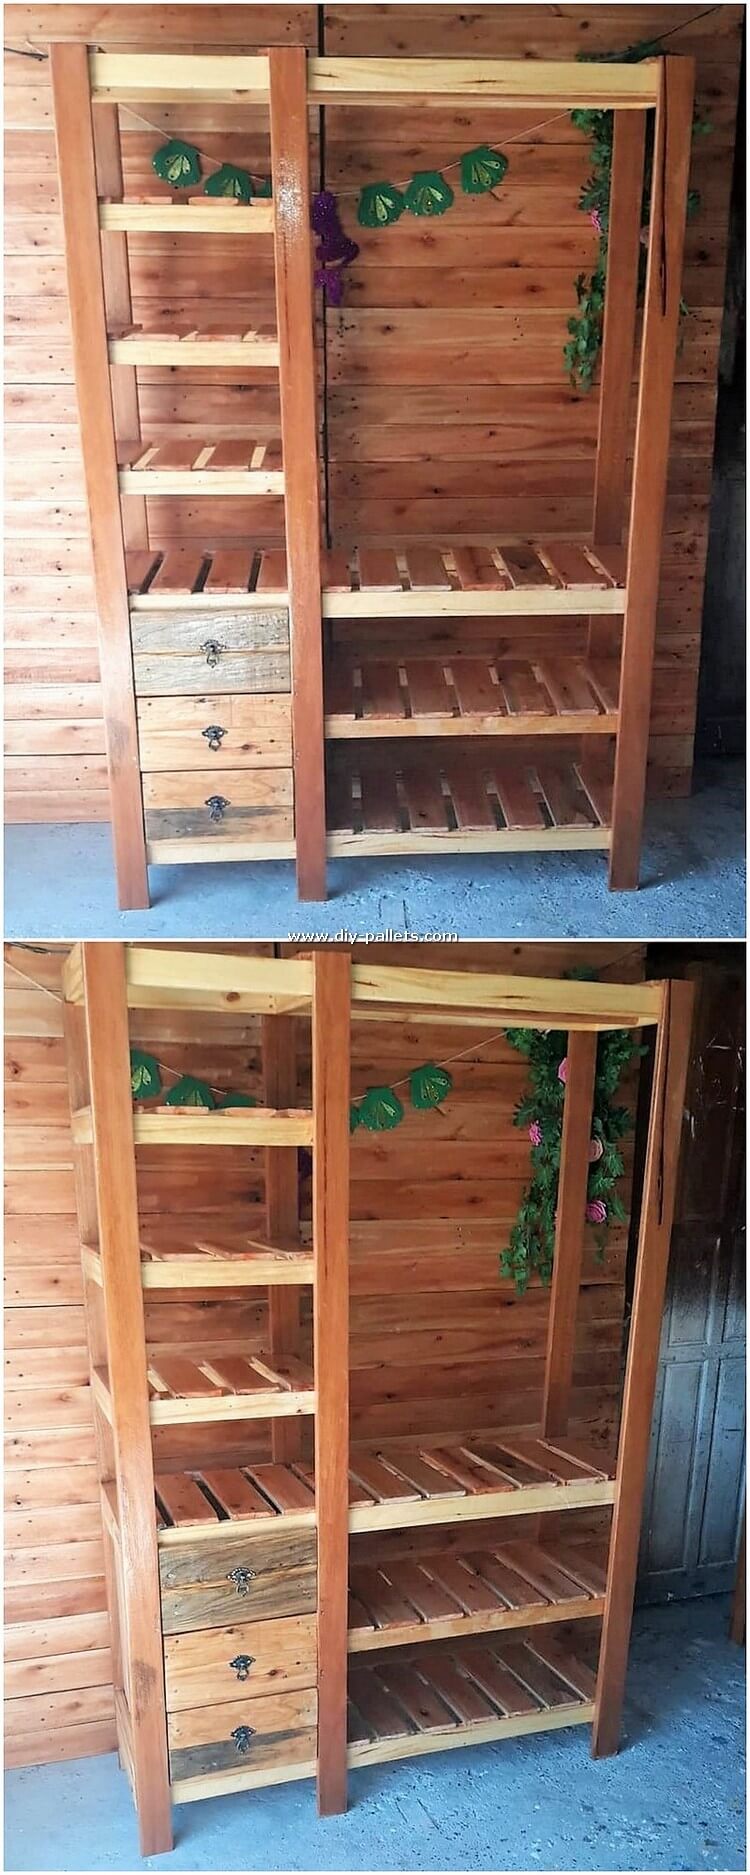 Pallet Shelving Unit with Drawers